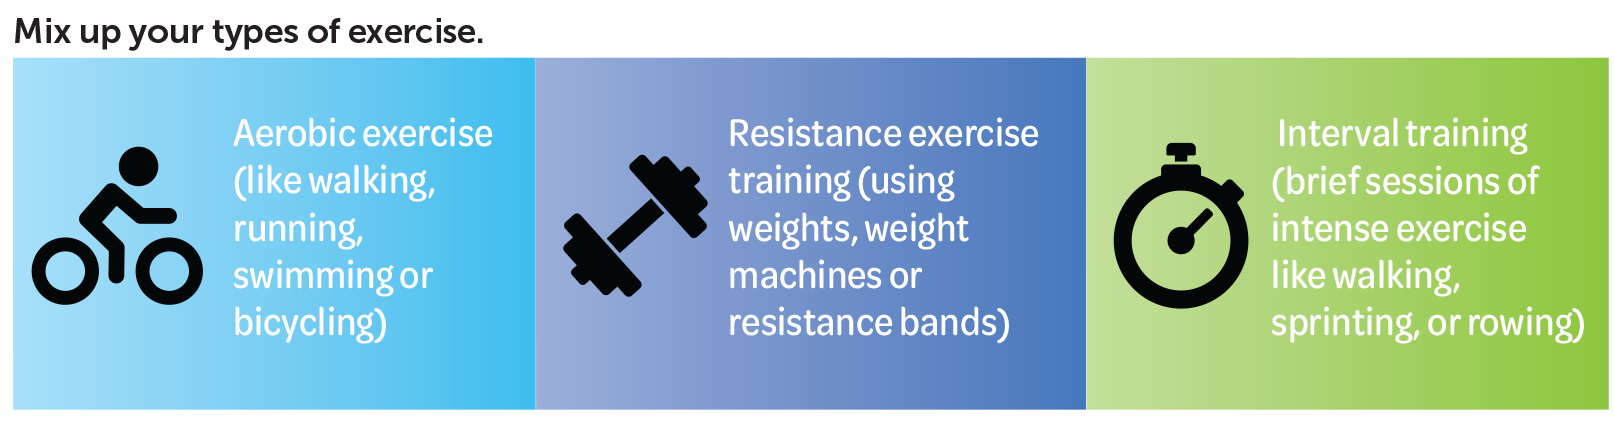 An image with text reading: 'Mix up your types of exercise' and images of aerobic exercise, resistance exercise, and interval training.